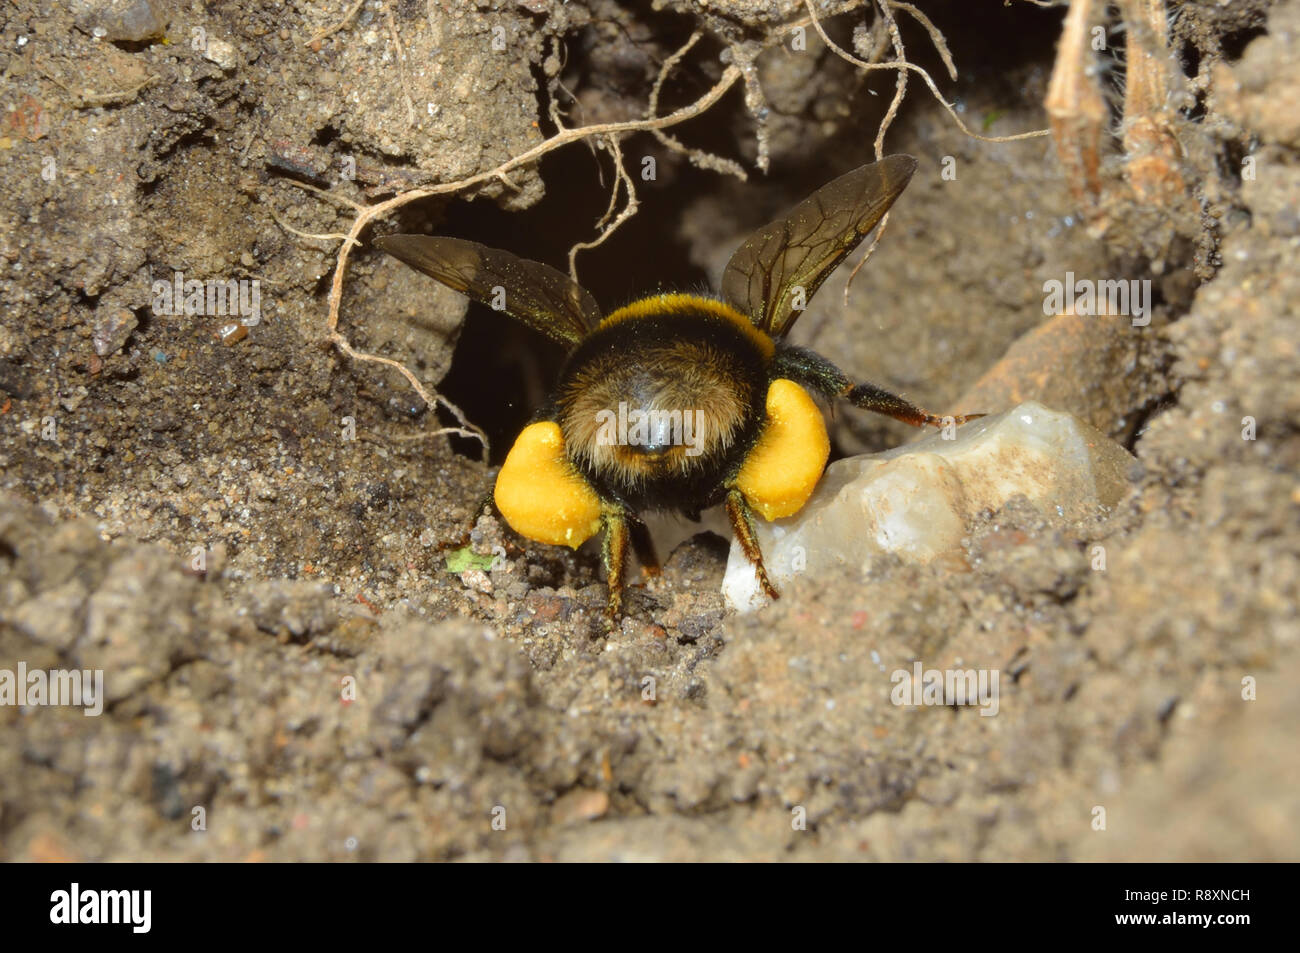 Bumblebee in flight, in and out of dirt burrow. Stock Photo